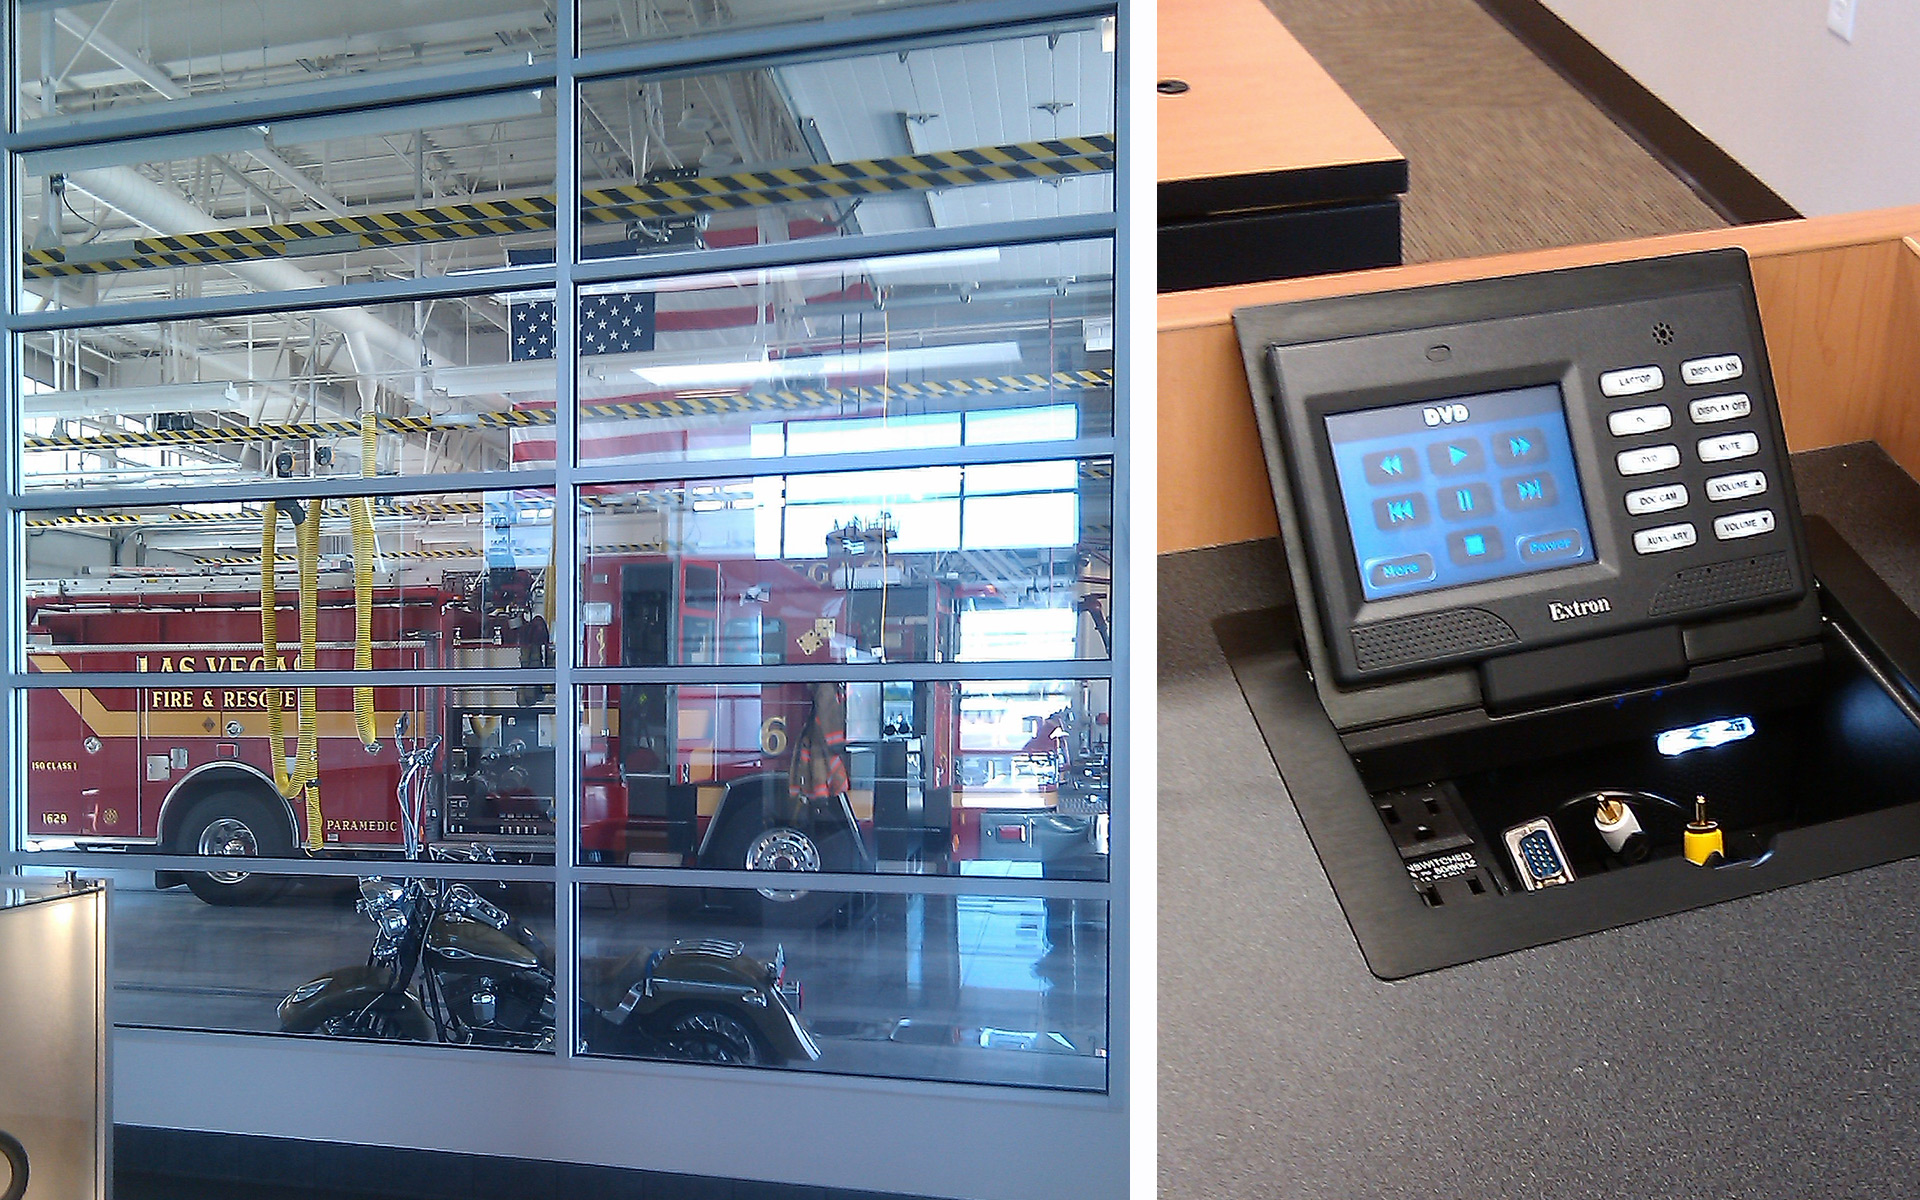 Las Vegas Fire Department and Extron TouchLink™ Technology in the Fire Station